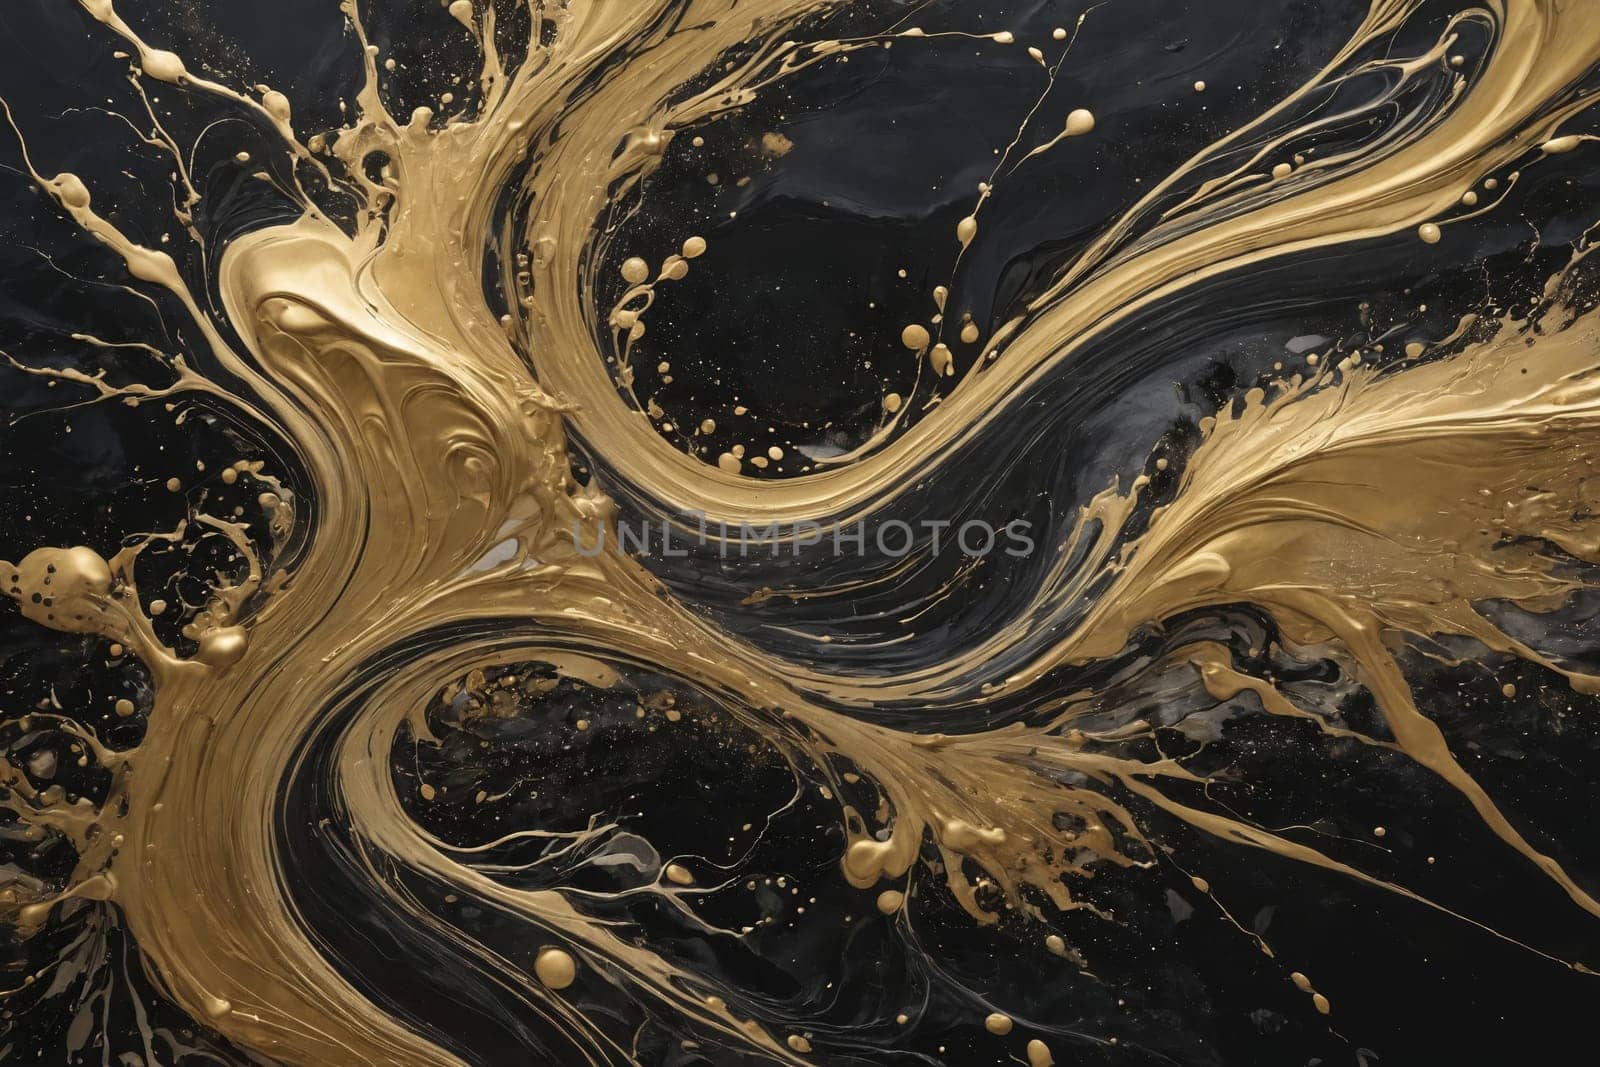 A close view into the dance of black and gold paints, creating an abstract masterpiece.